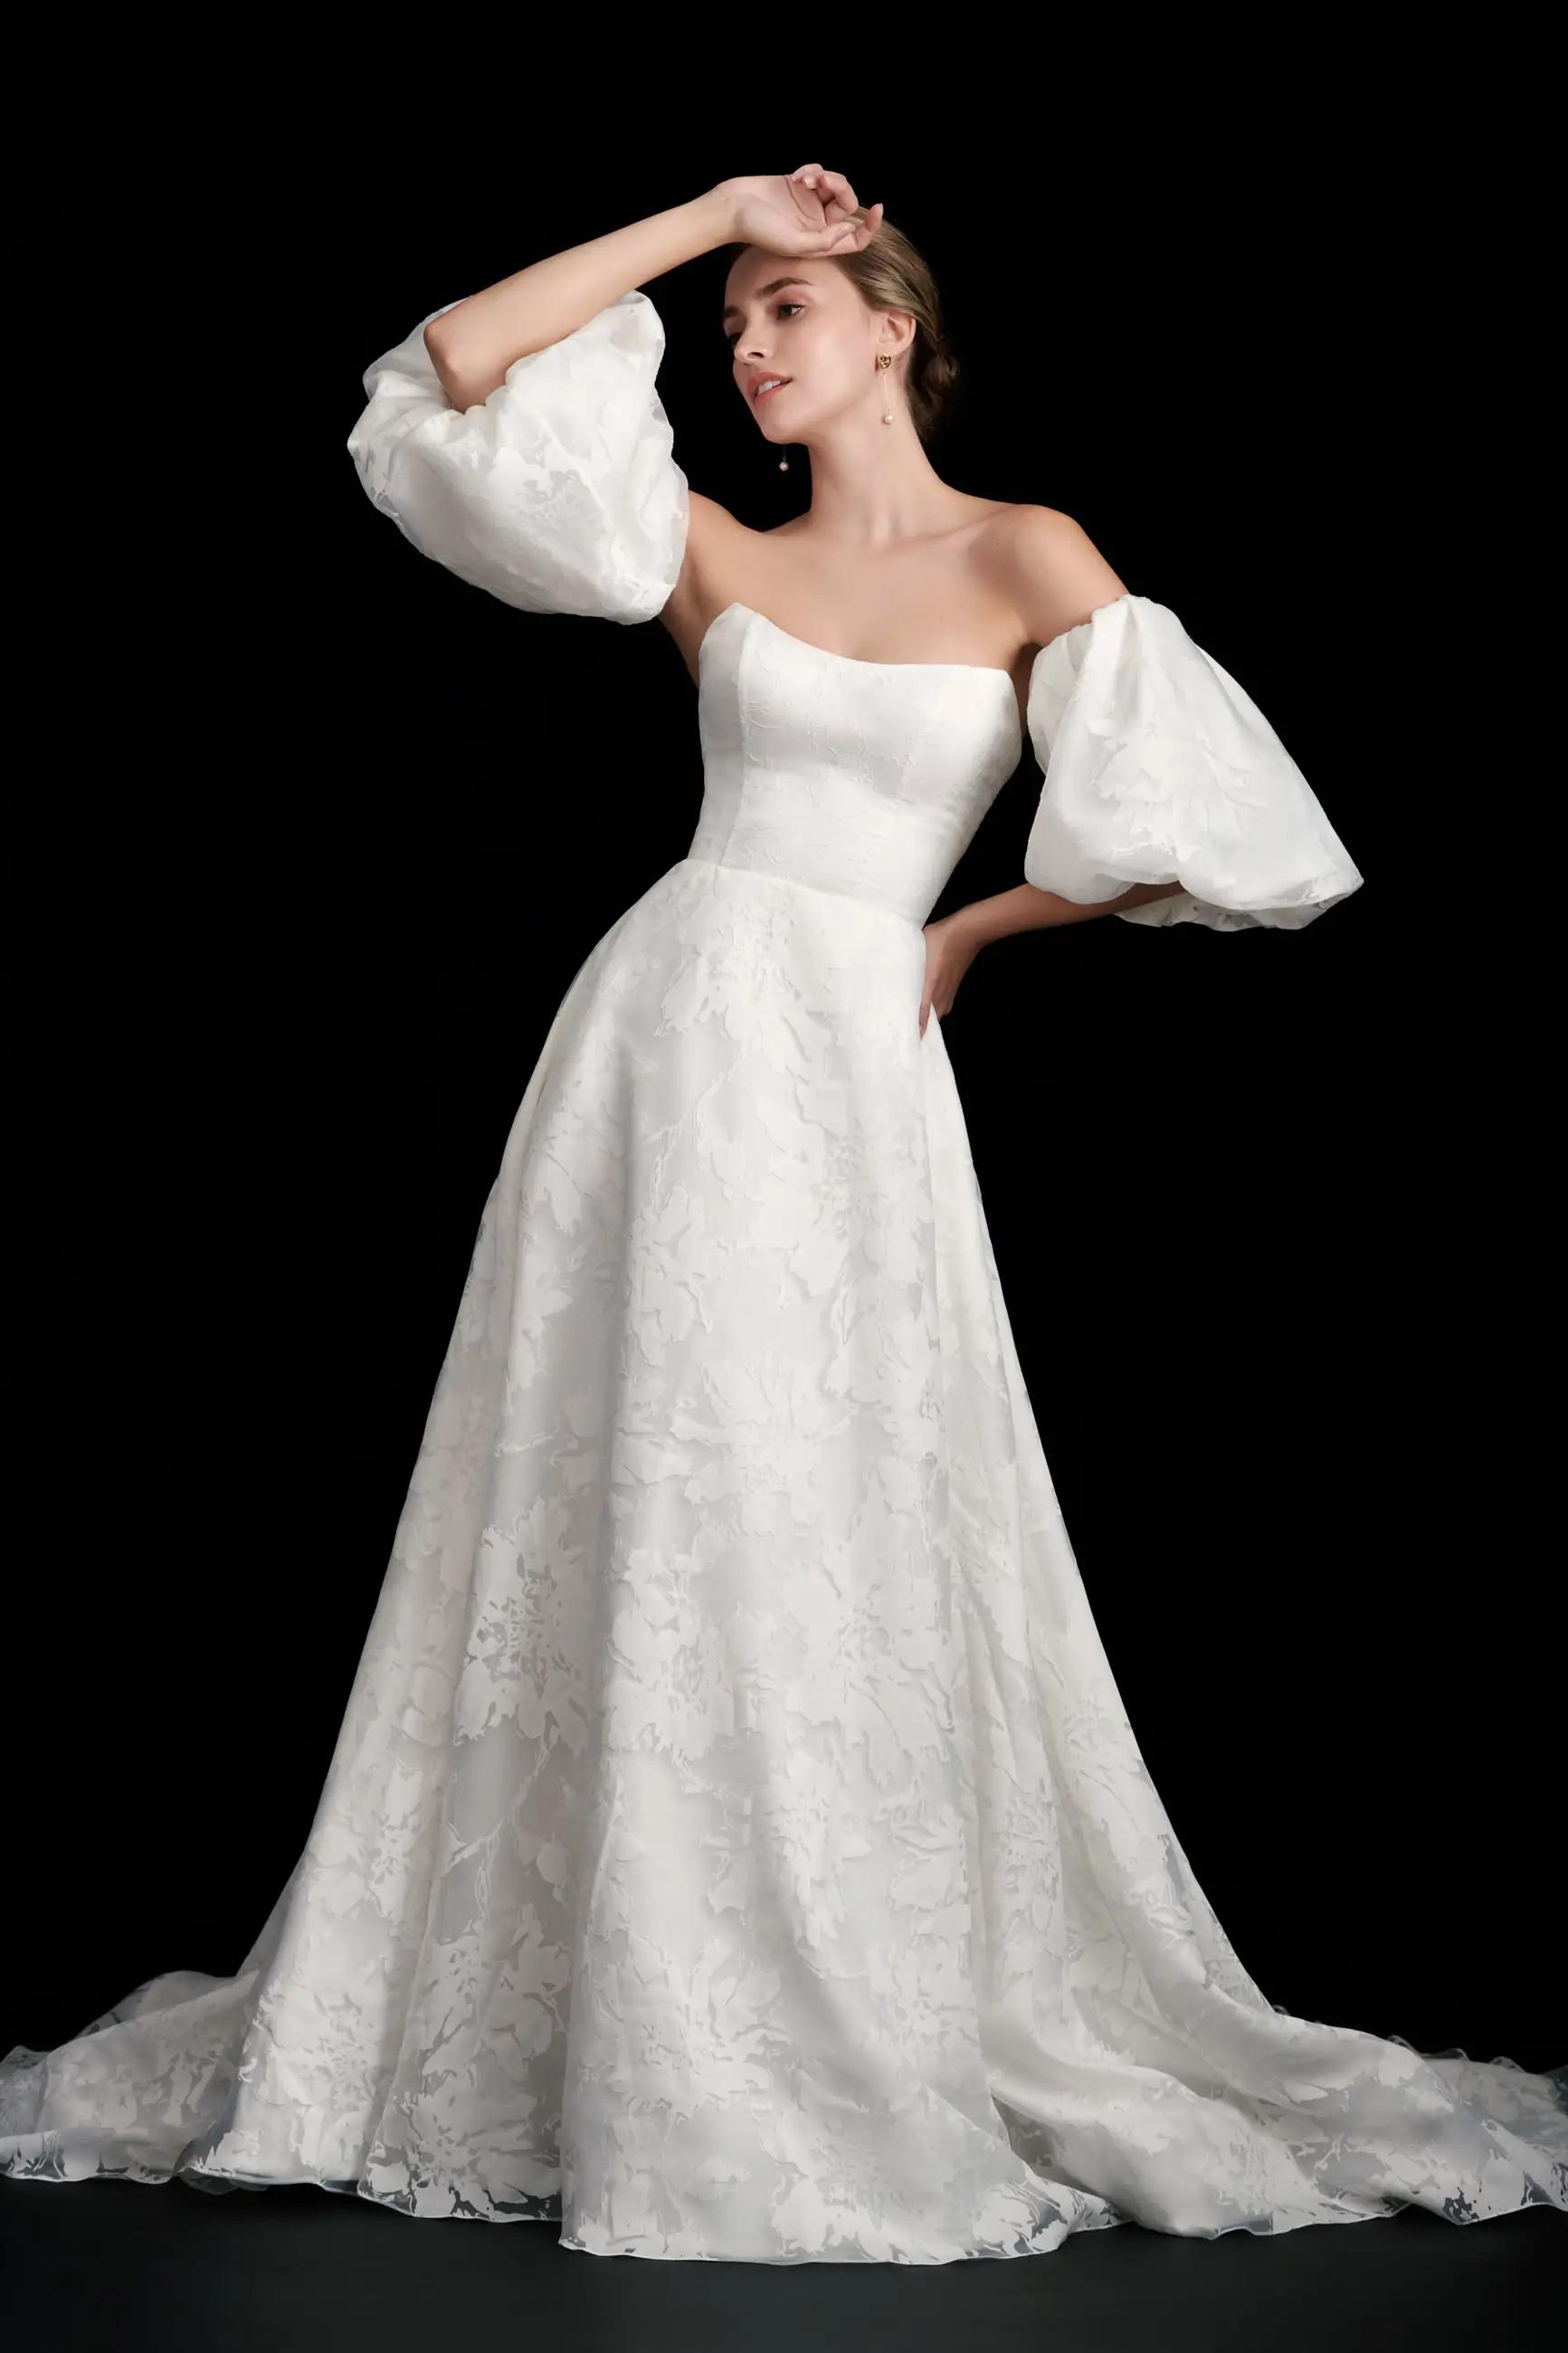 Jardins wedding dress by Kelly Faetanini with detachable sleeves and burnout organza floral A line skirt